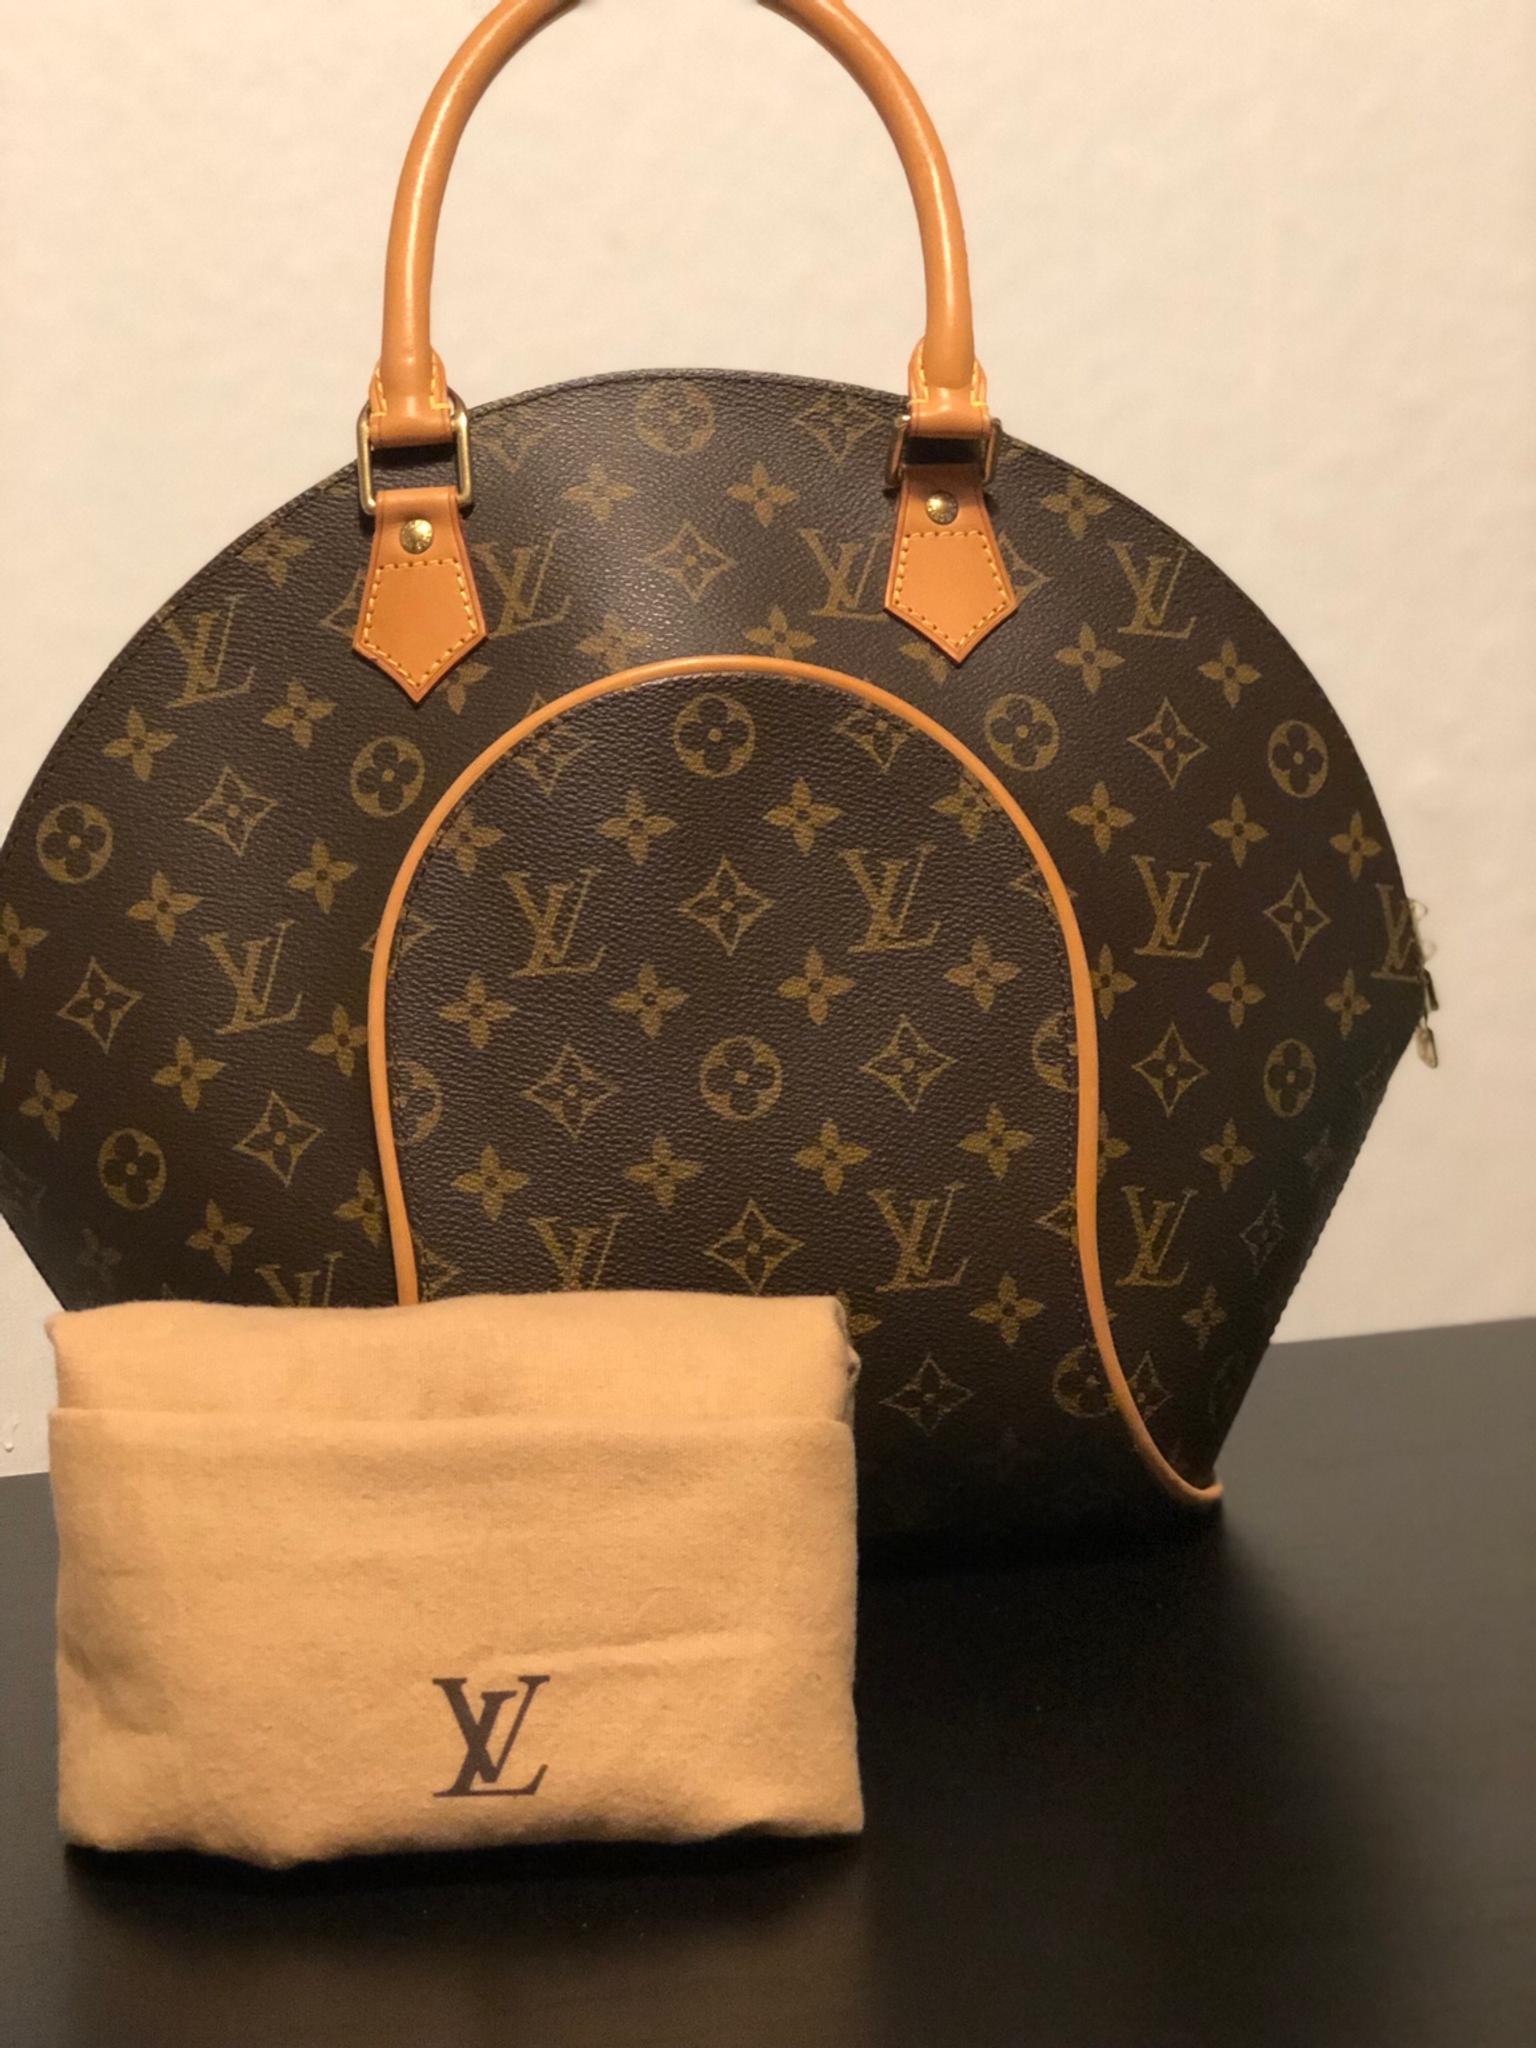 Louis Vuitton Ellipse Tasche in 76139 Karlsruhe for €700.00 for sale | Shpock